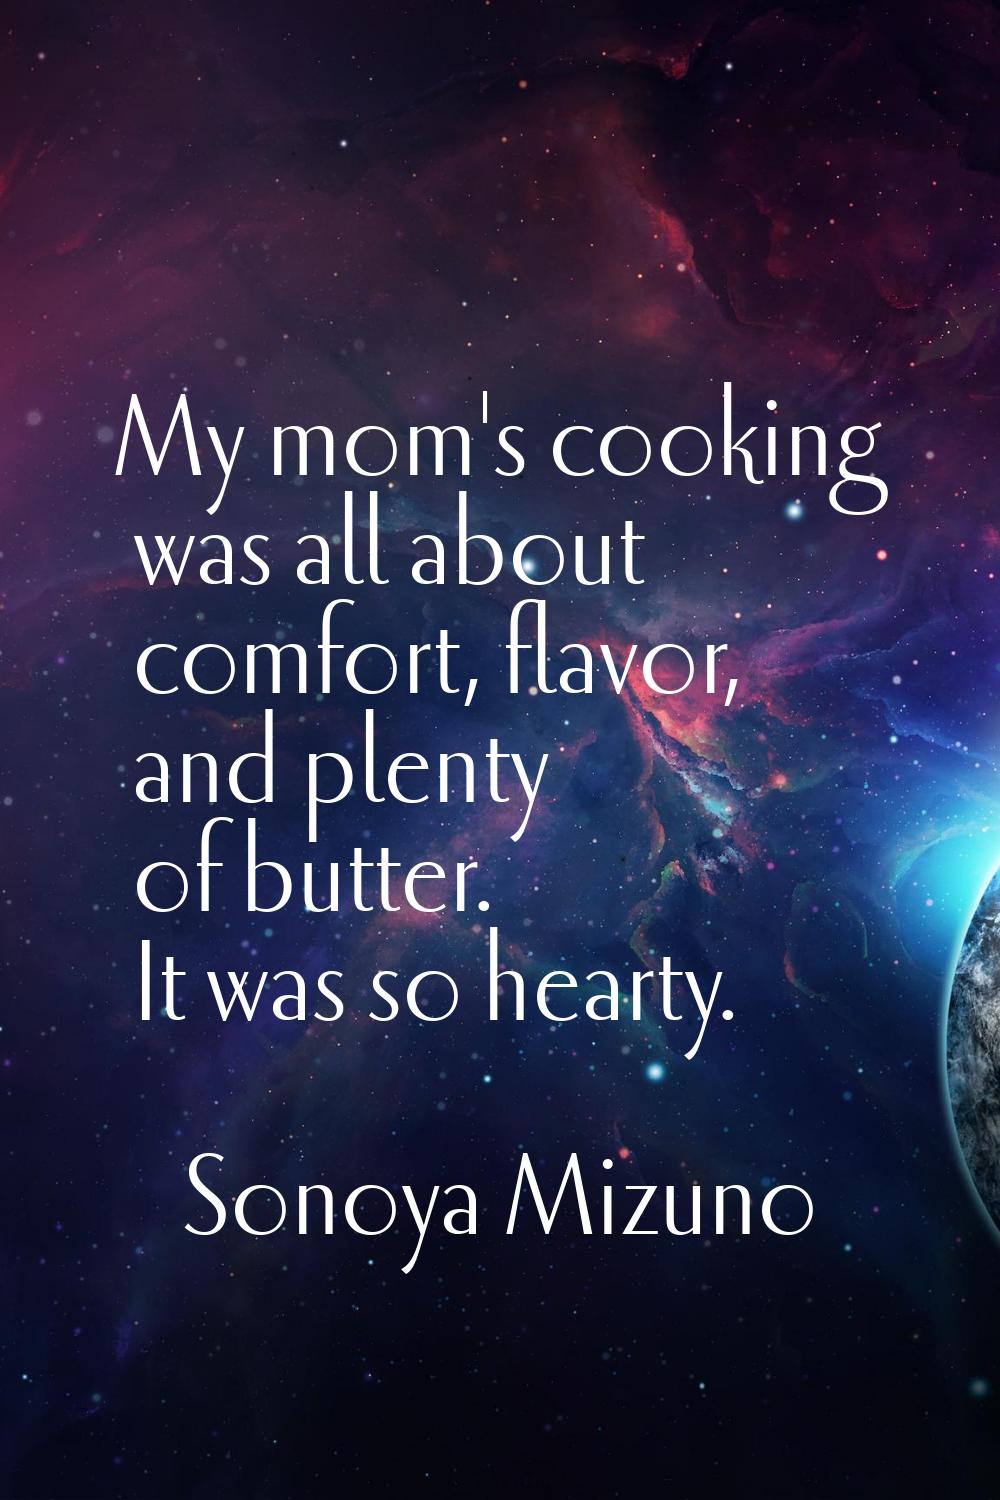 My mom's cooking was all about comfort, flavor, and plenty of butter. It was so hearty.